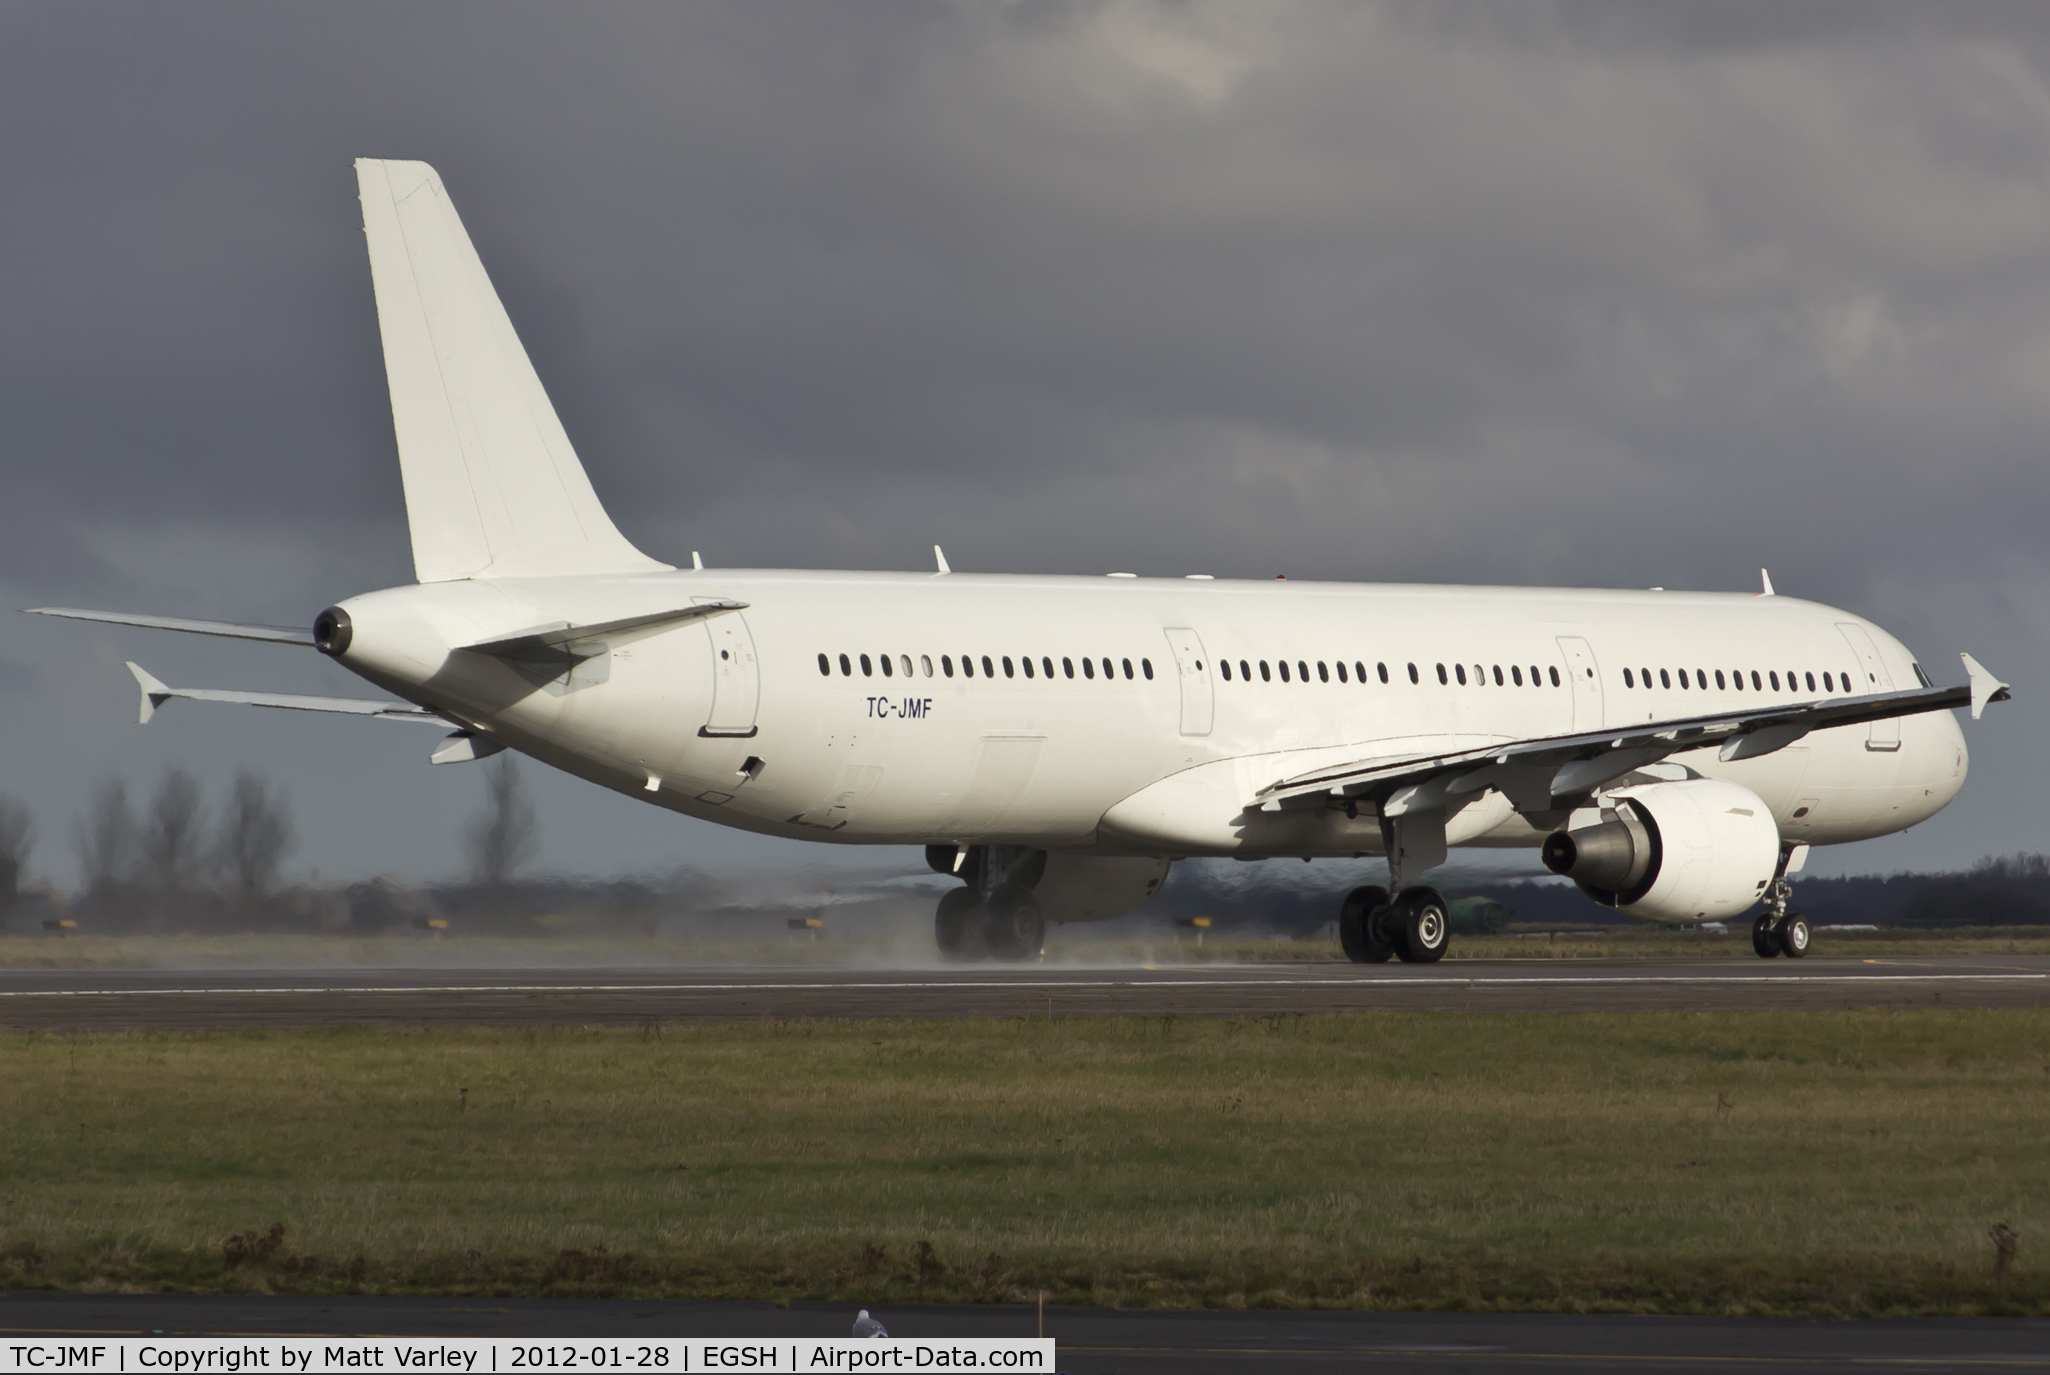 TC-JMF, 2000 Airbus A321-211 C/N 1233, Arriving at EGSH for spray into nordwind C/S.